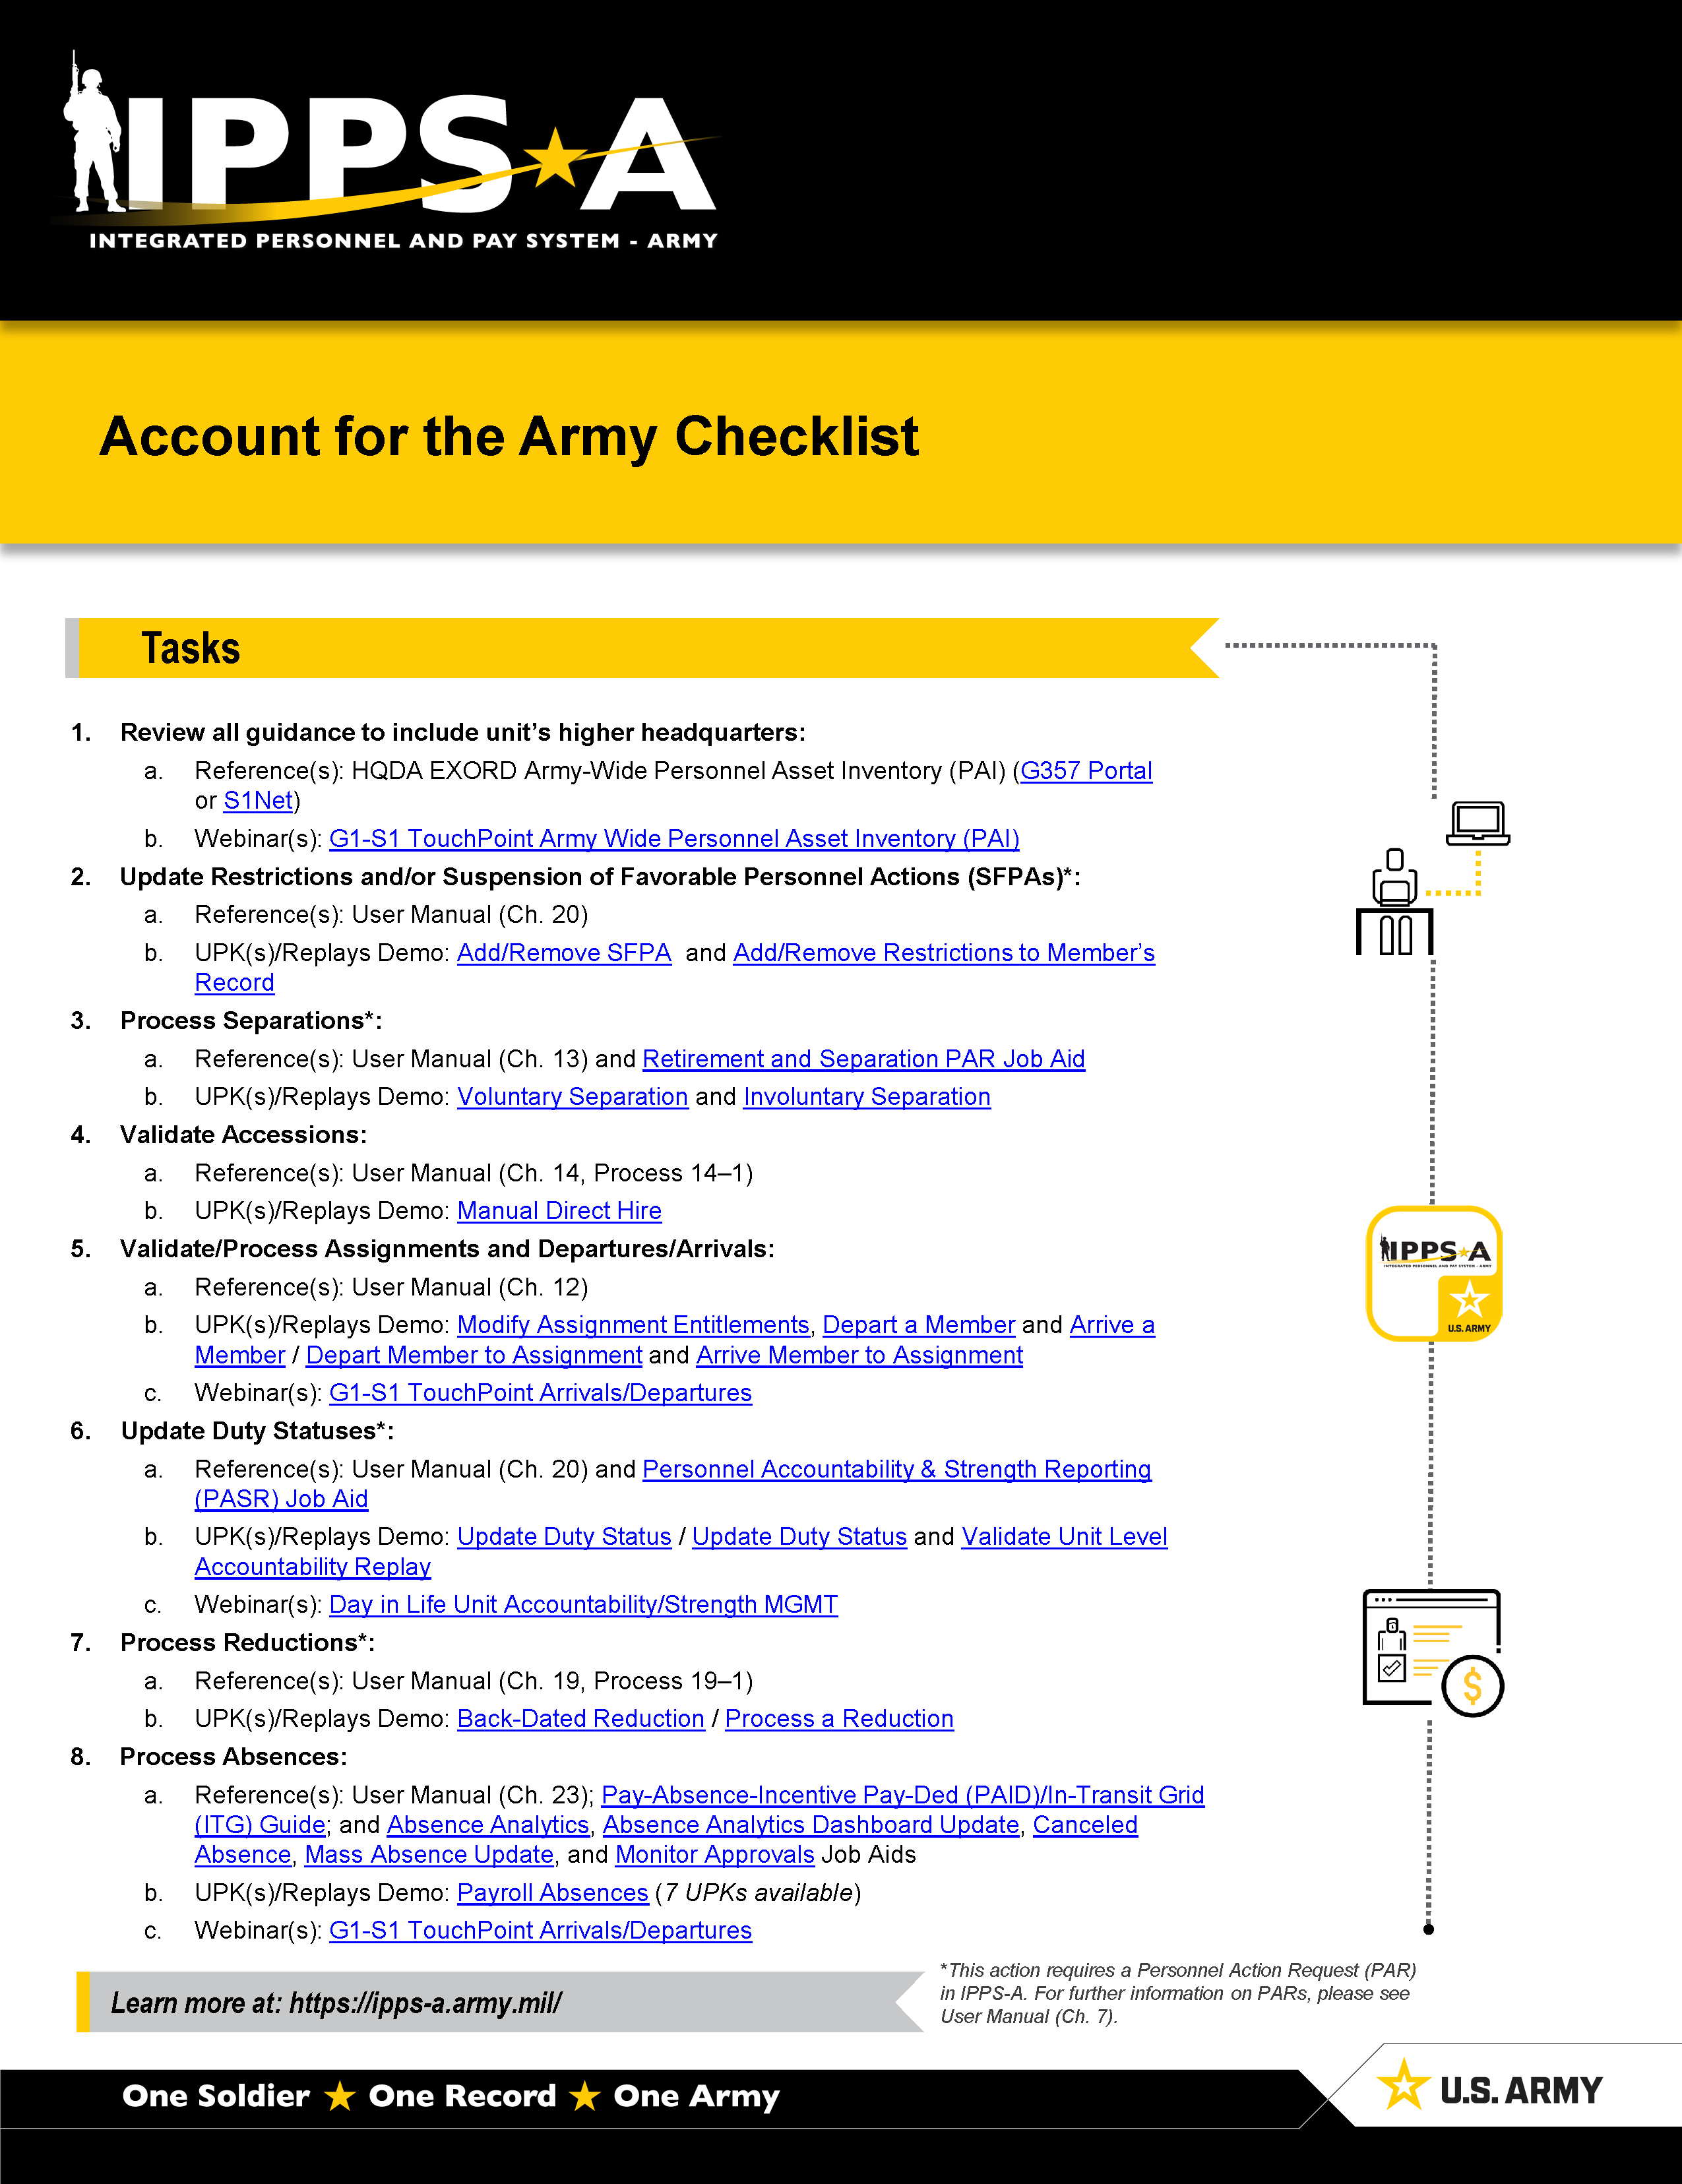 Link for Account for the Army Checklist